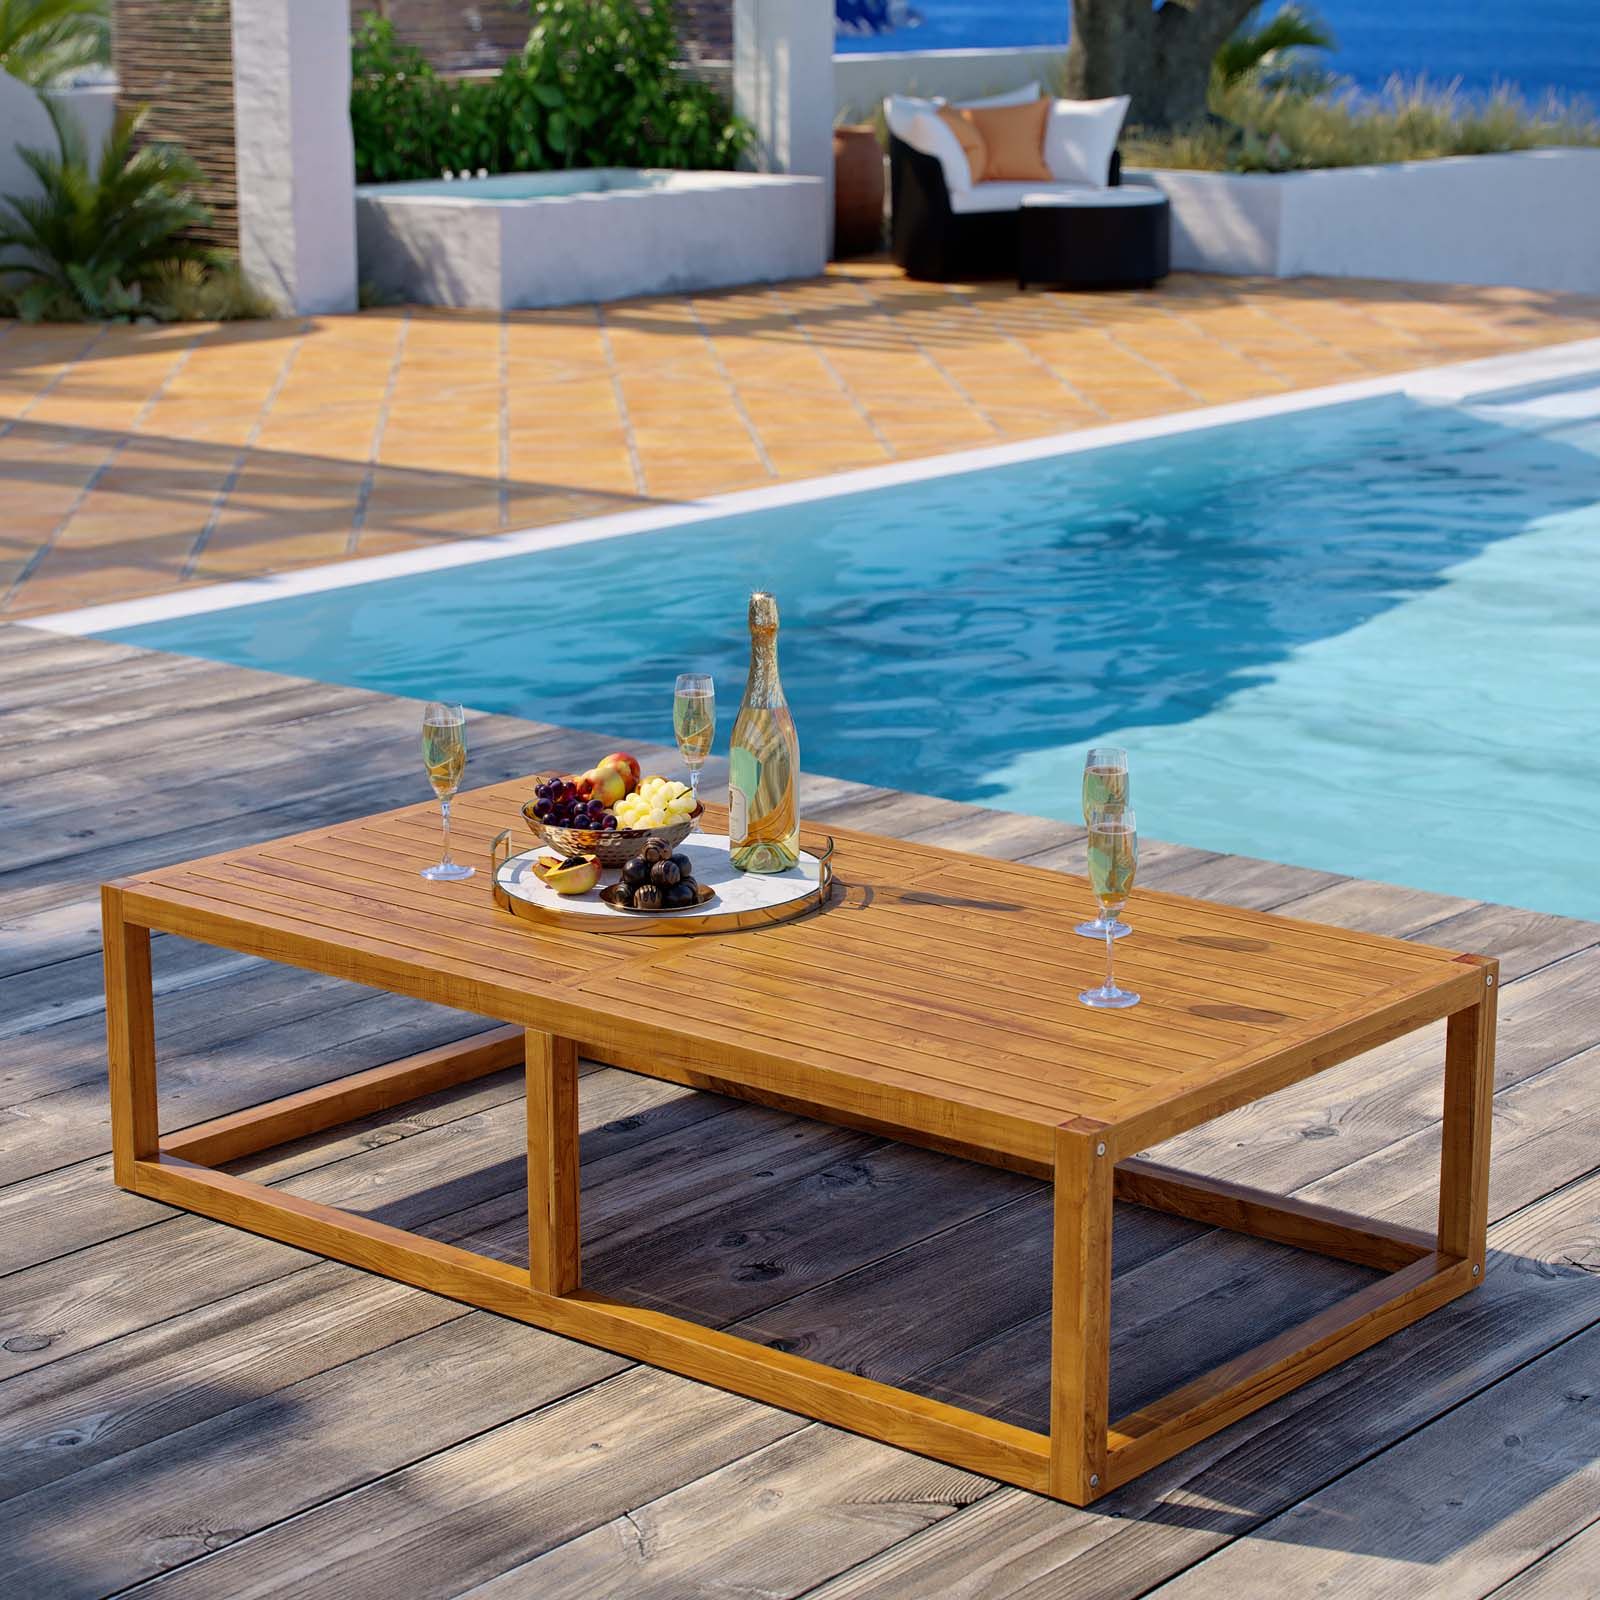 Newbury Outdoor Patio Premium Grade A Teak Wood Coffee Table Natural Within Modern Outdoor Patio Coffee Tables (View 15 of 20)